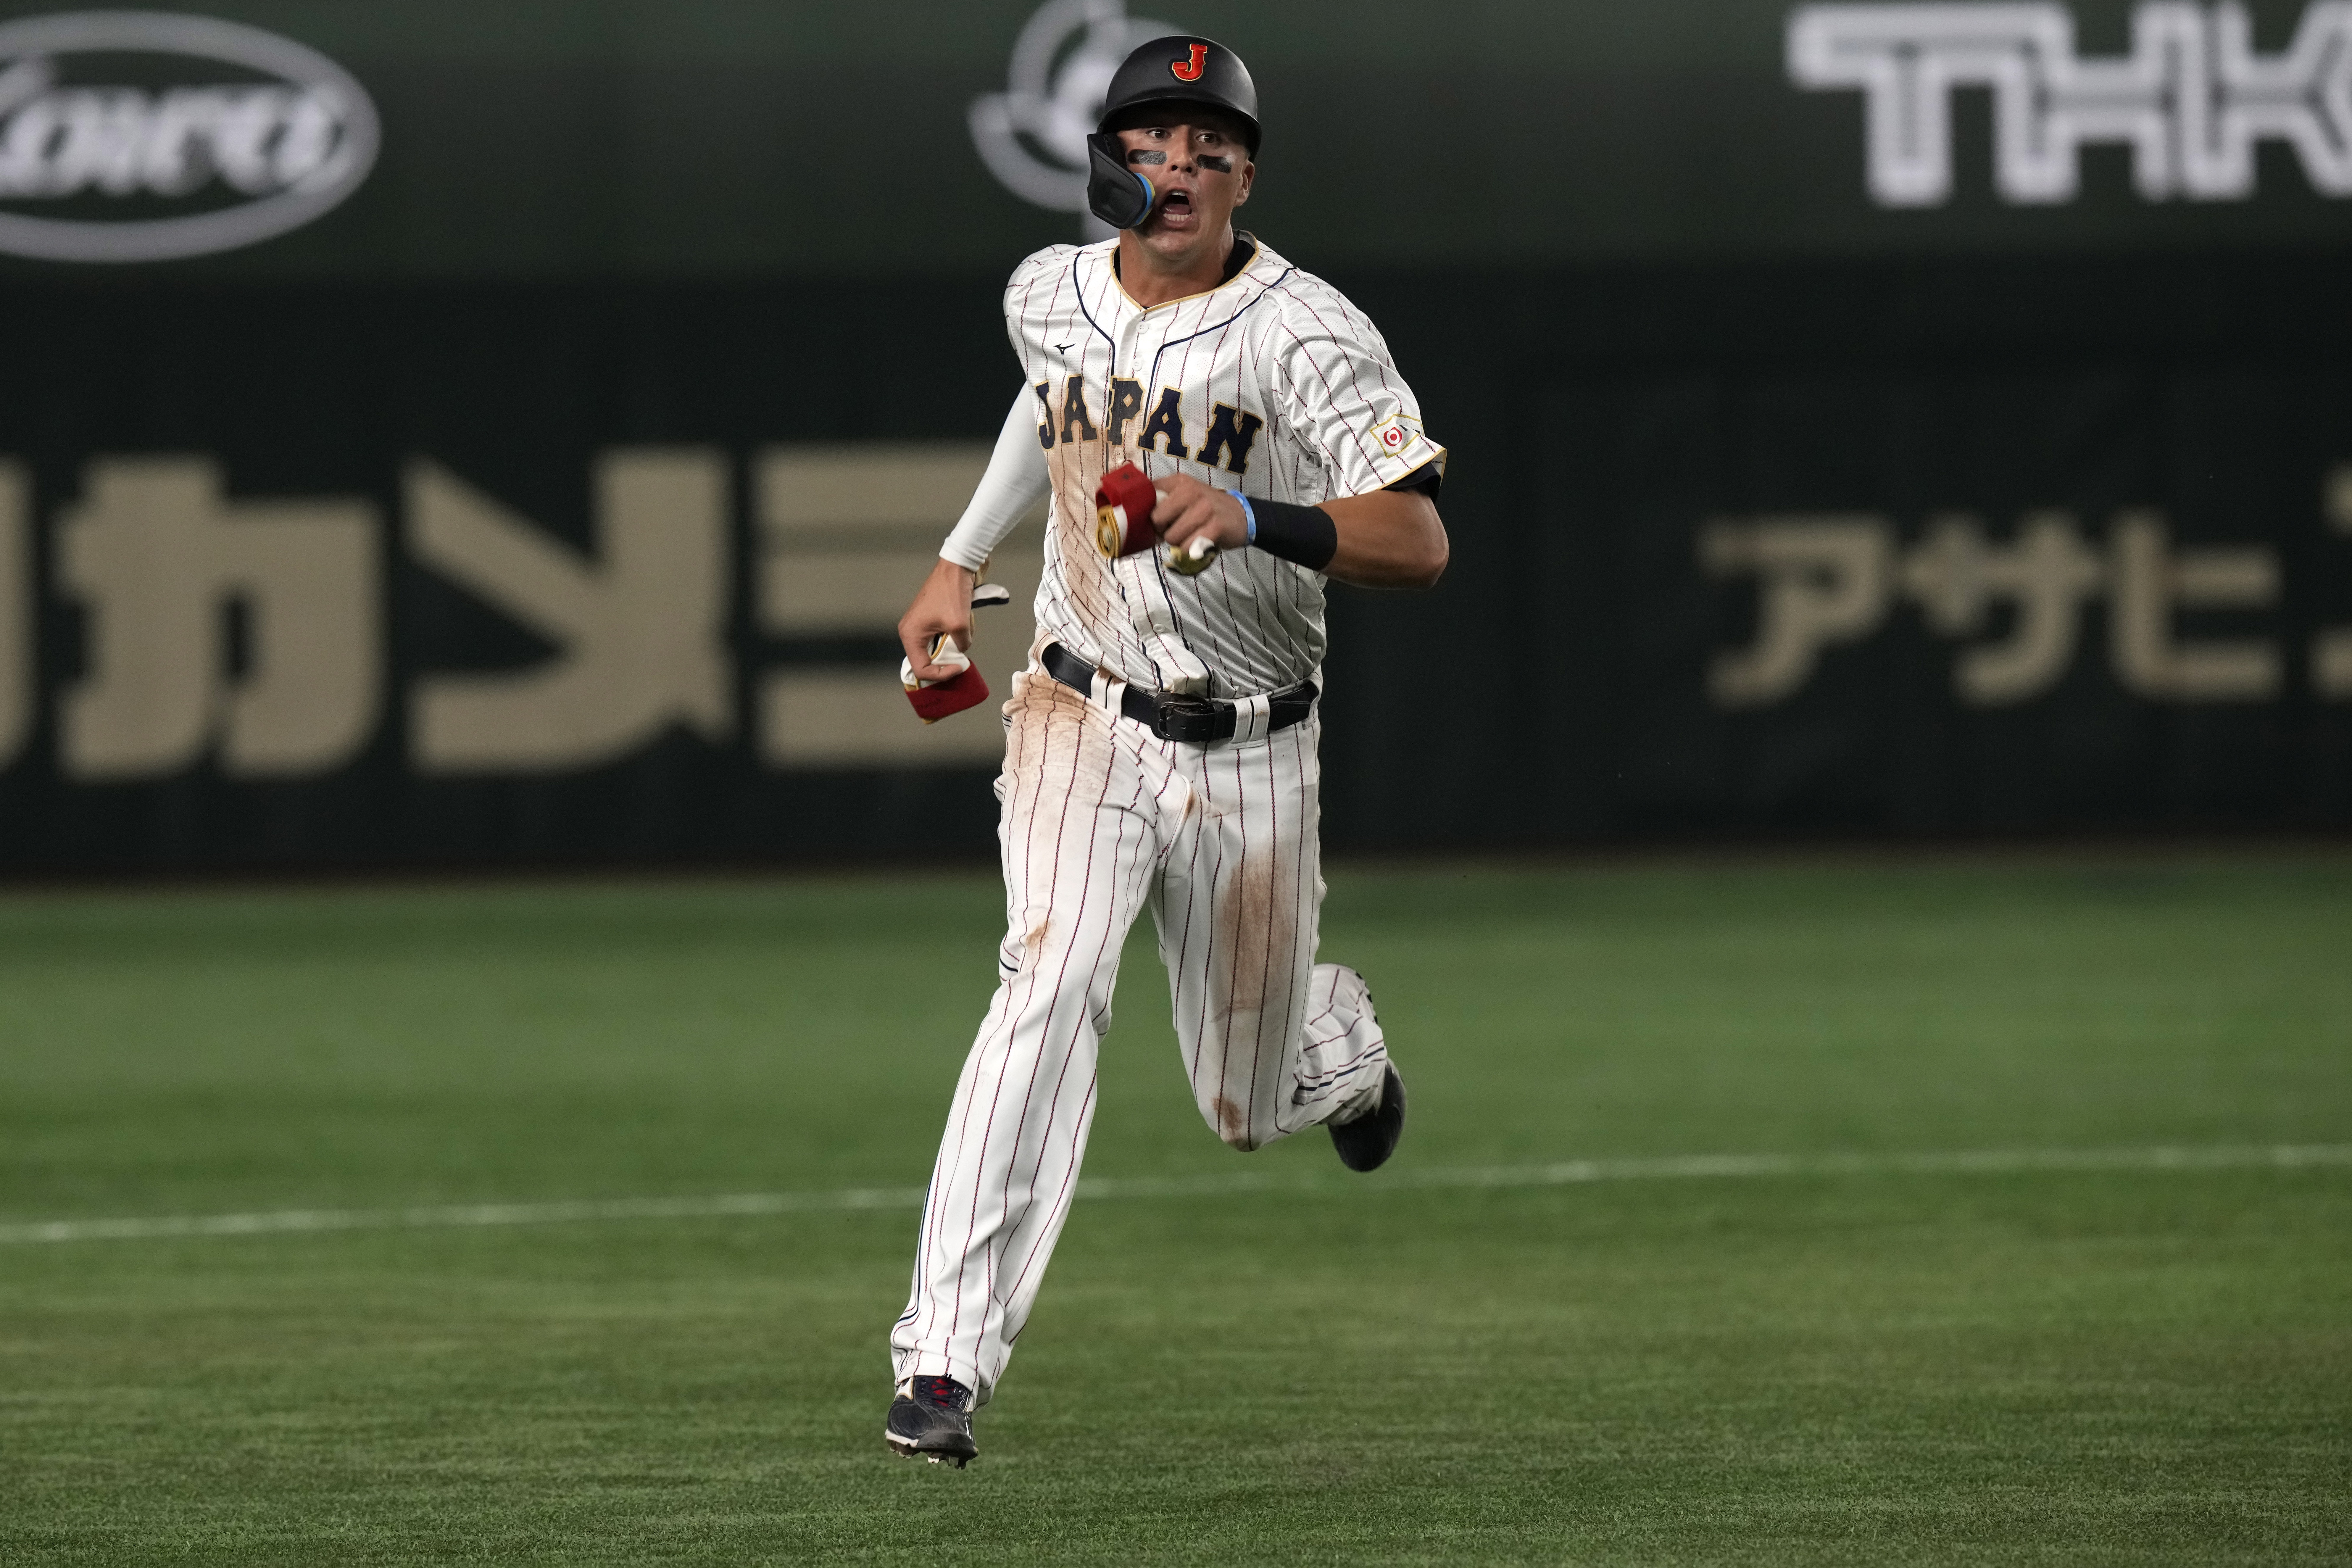 Lars Nootbaar is committed to play for Samurai Japan in the WBC